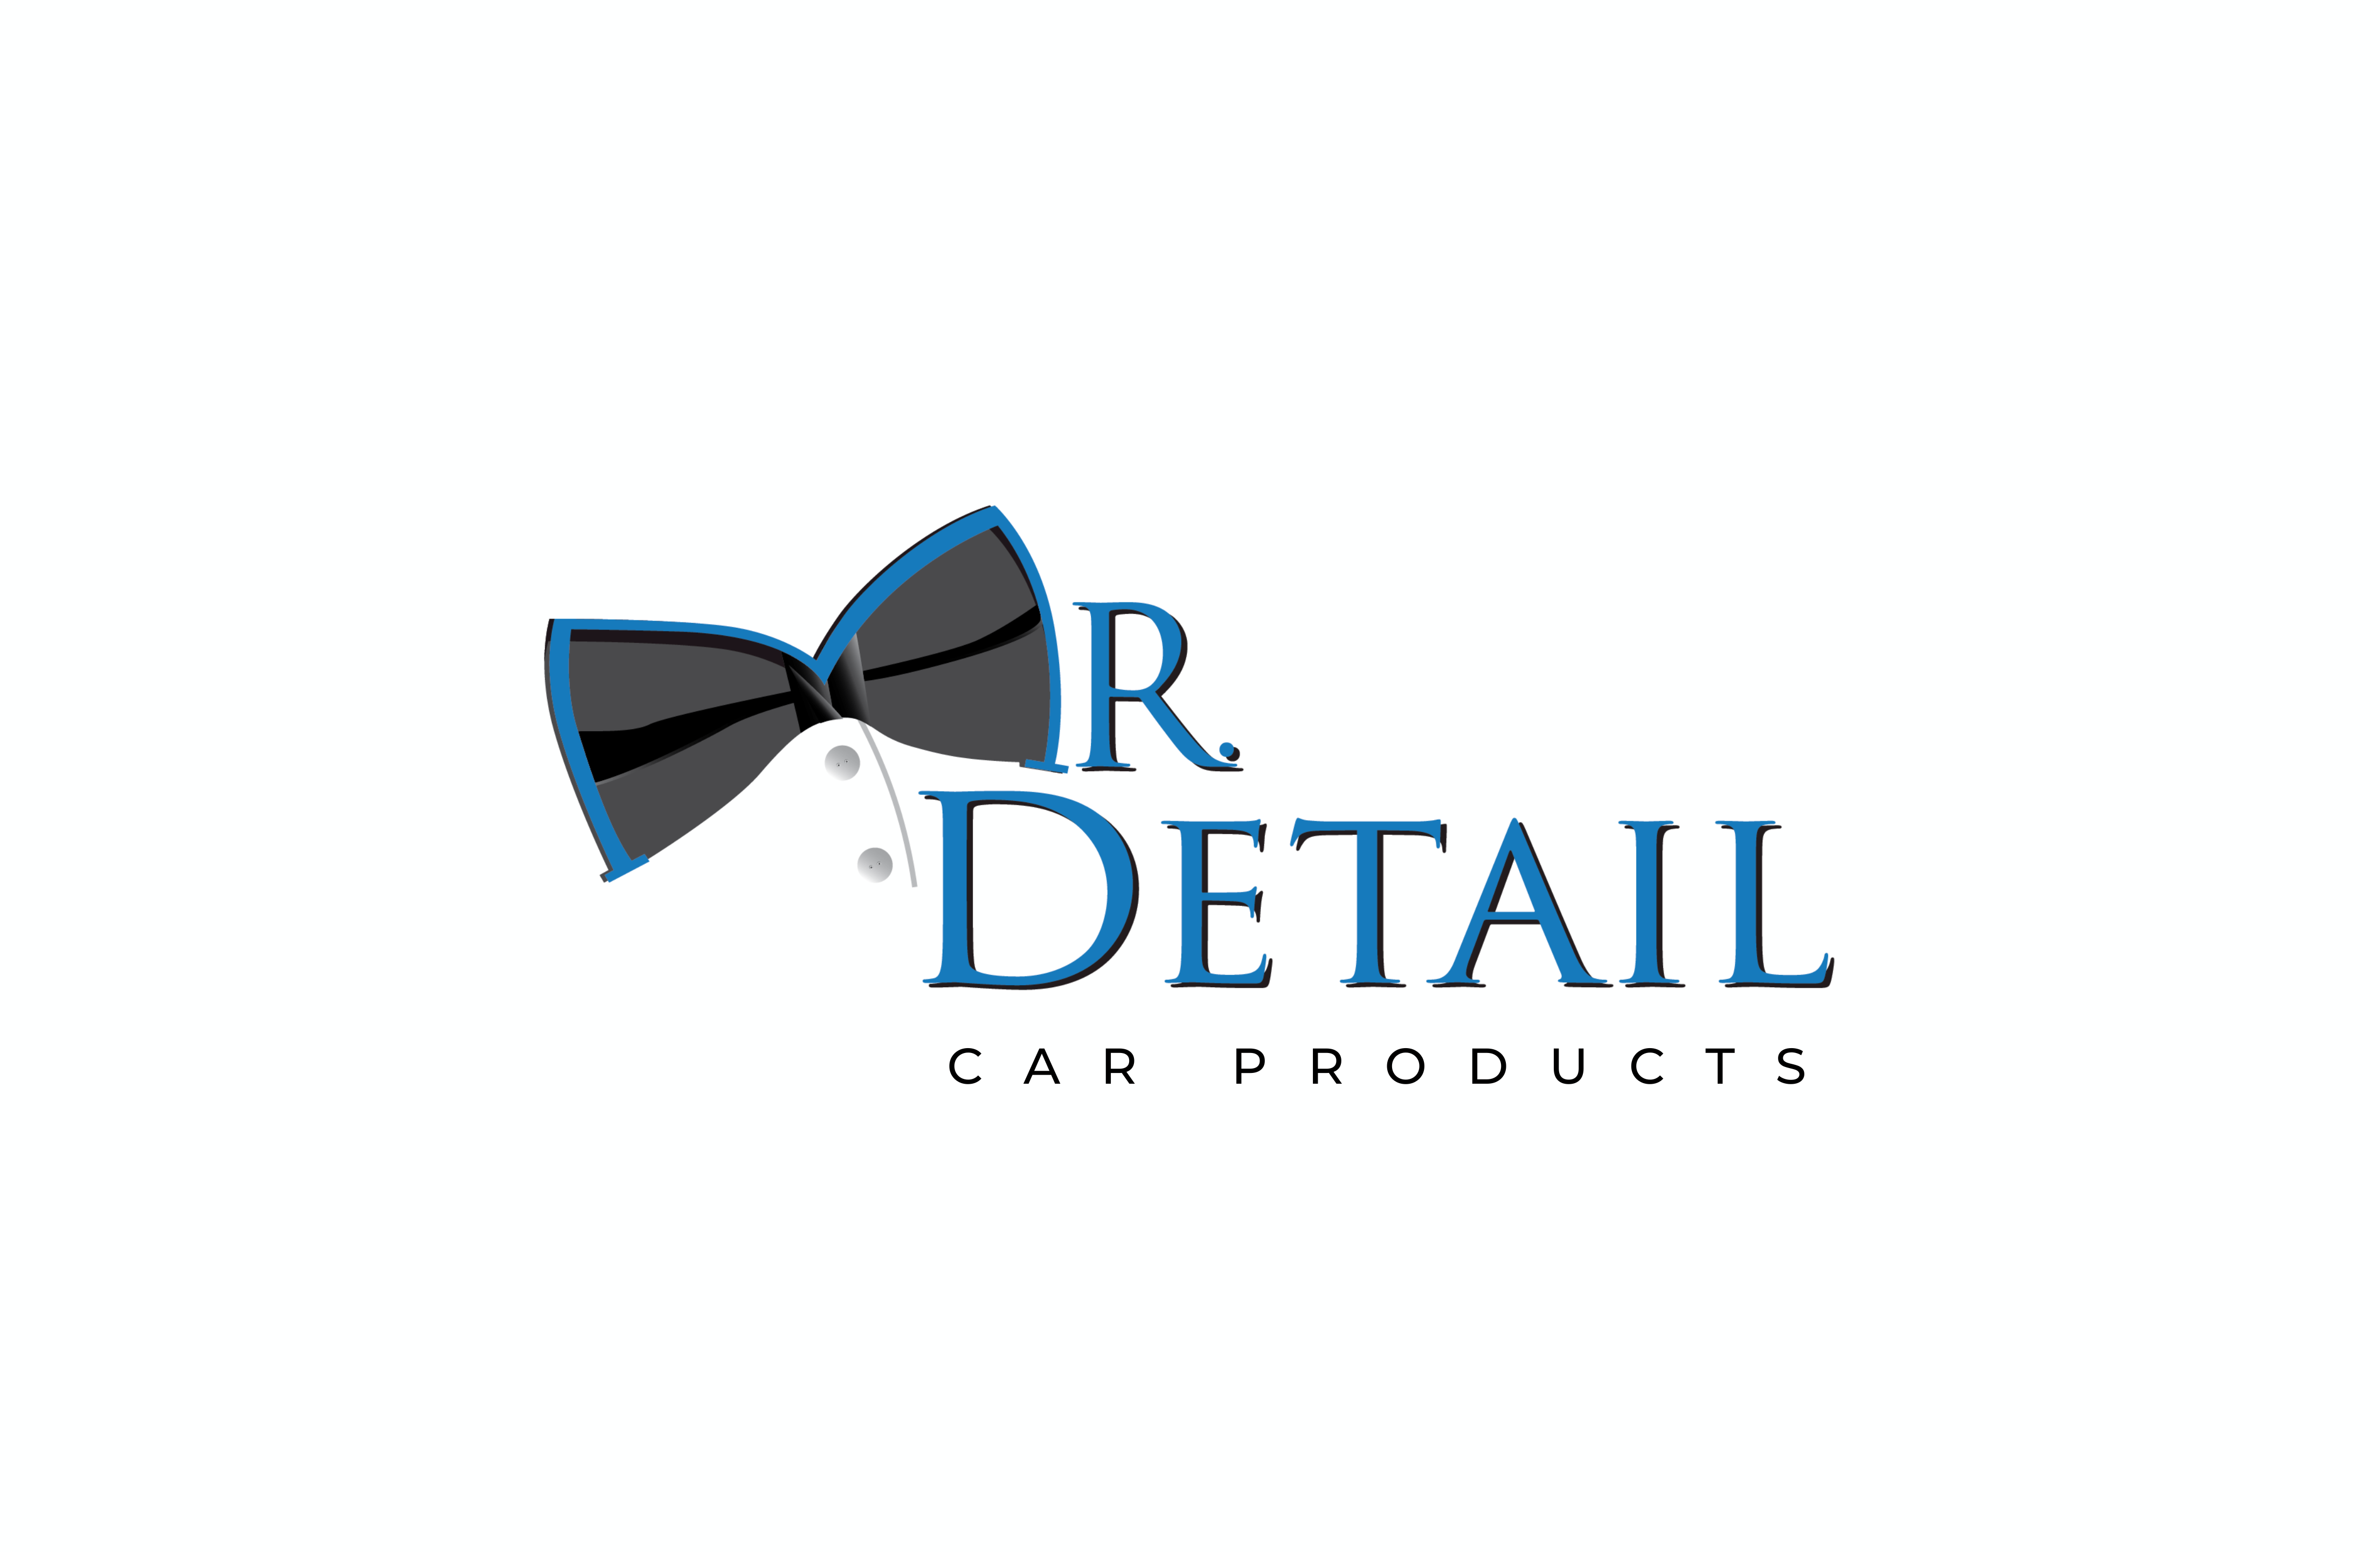 Mr. Detail Car Products